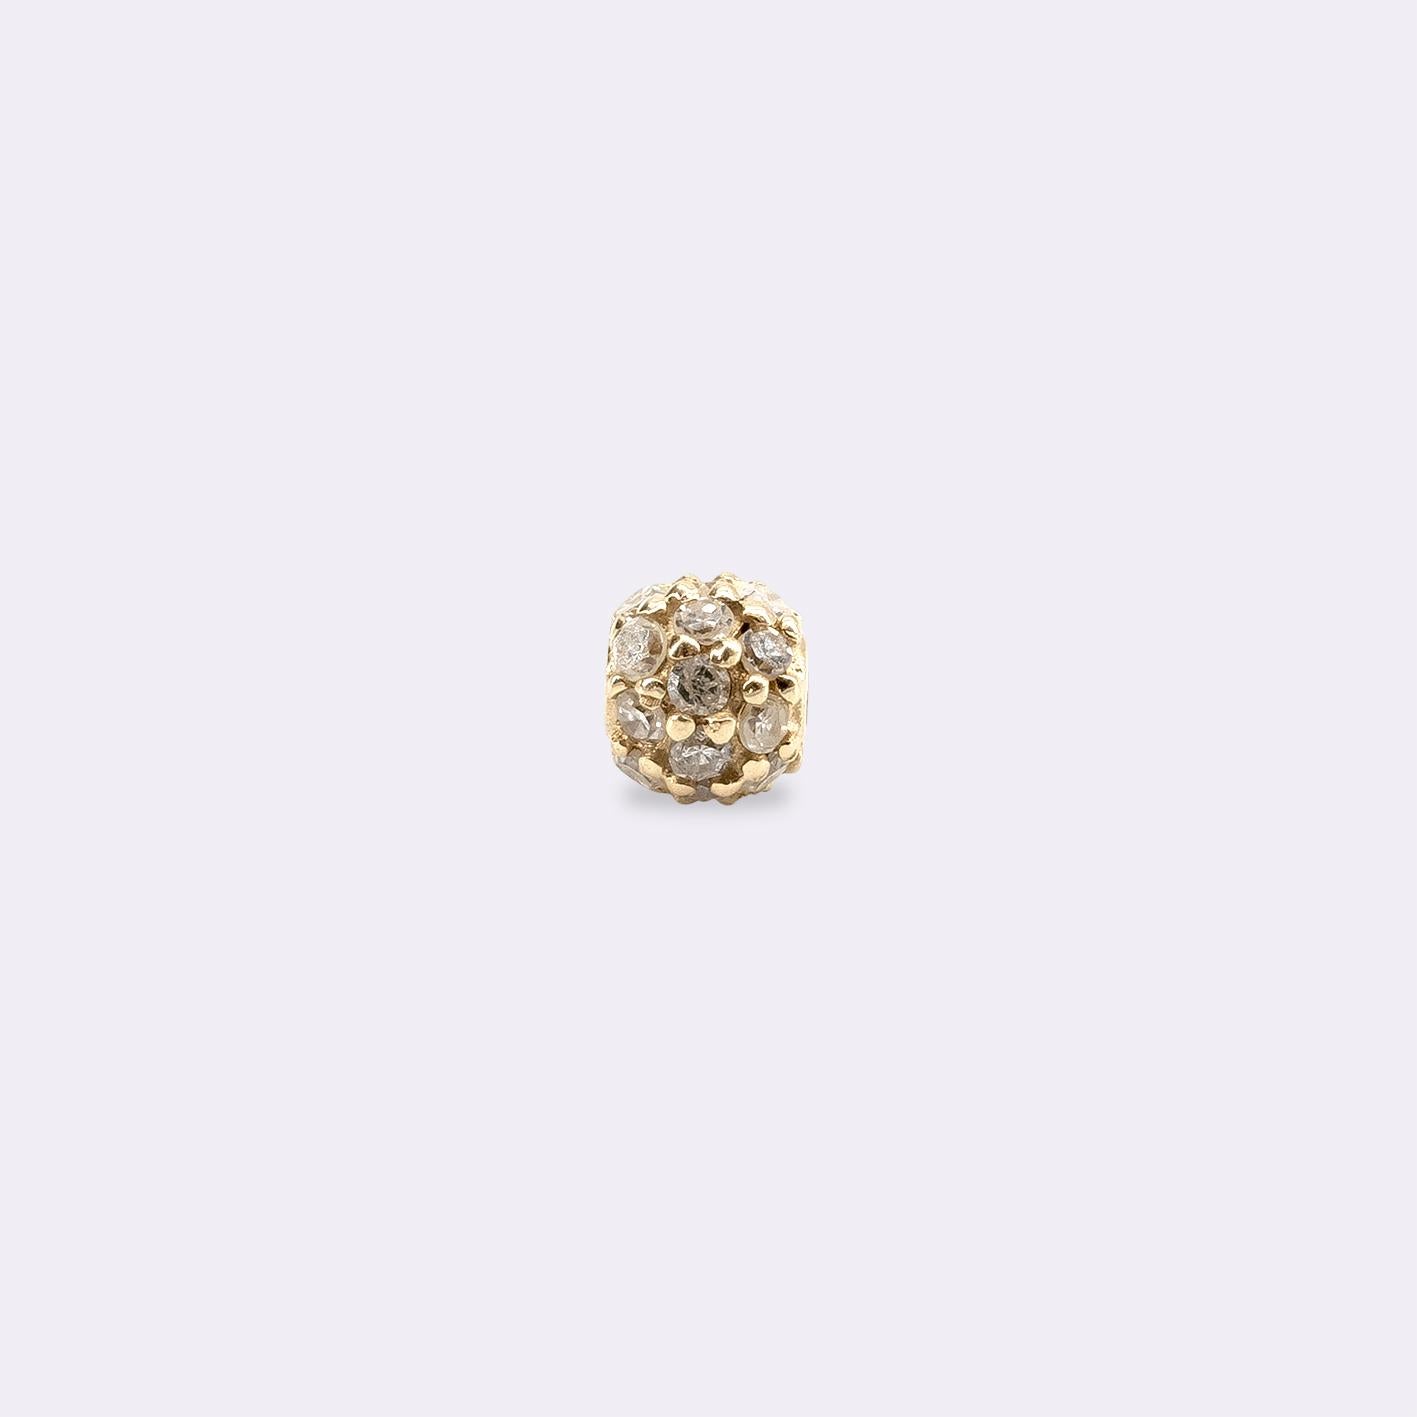 14k yellow gold
21 white diamonds
Diameter 4 mm
White nylon drawstring closure

This bracelet is a modern classic. Its concise design speaks for itself. The bracelet is barely noticeable, but the diamond ball refracts the light in an impressive